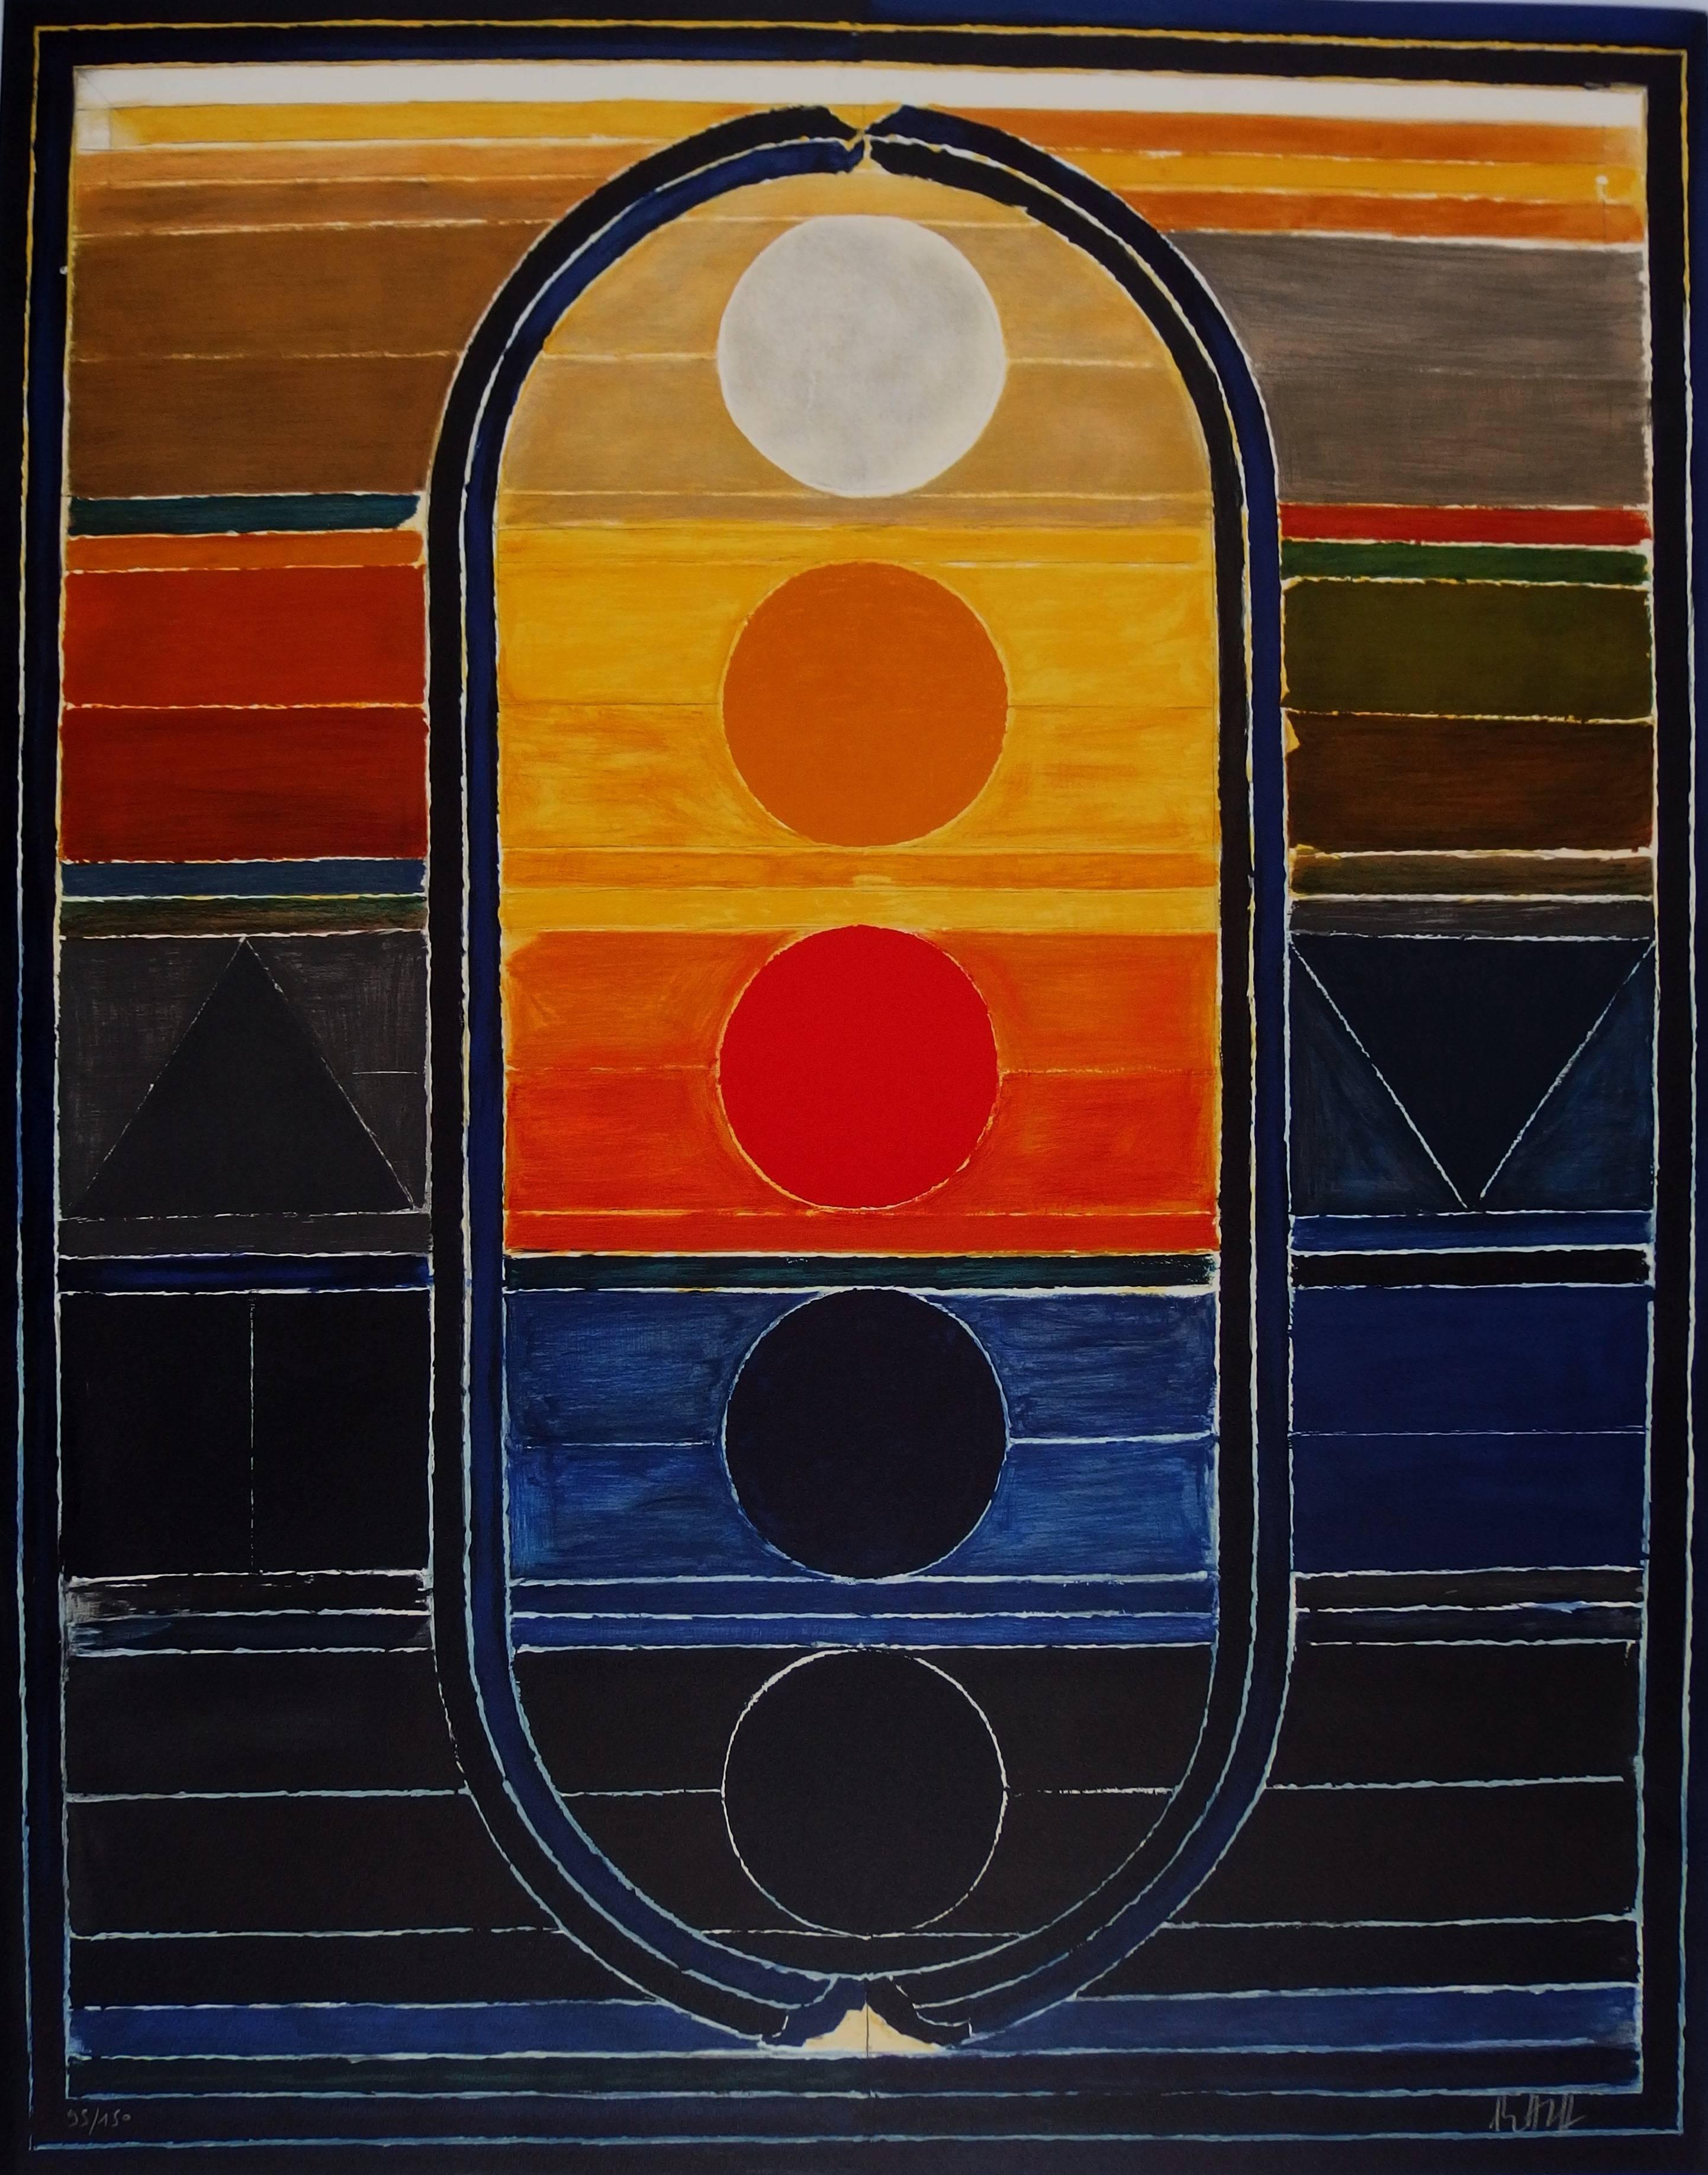 Sayed Haider Raza Abstract Print - Five elements - Original handsigned lithograph - 150 copies